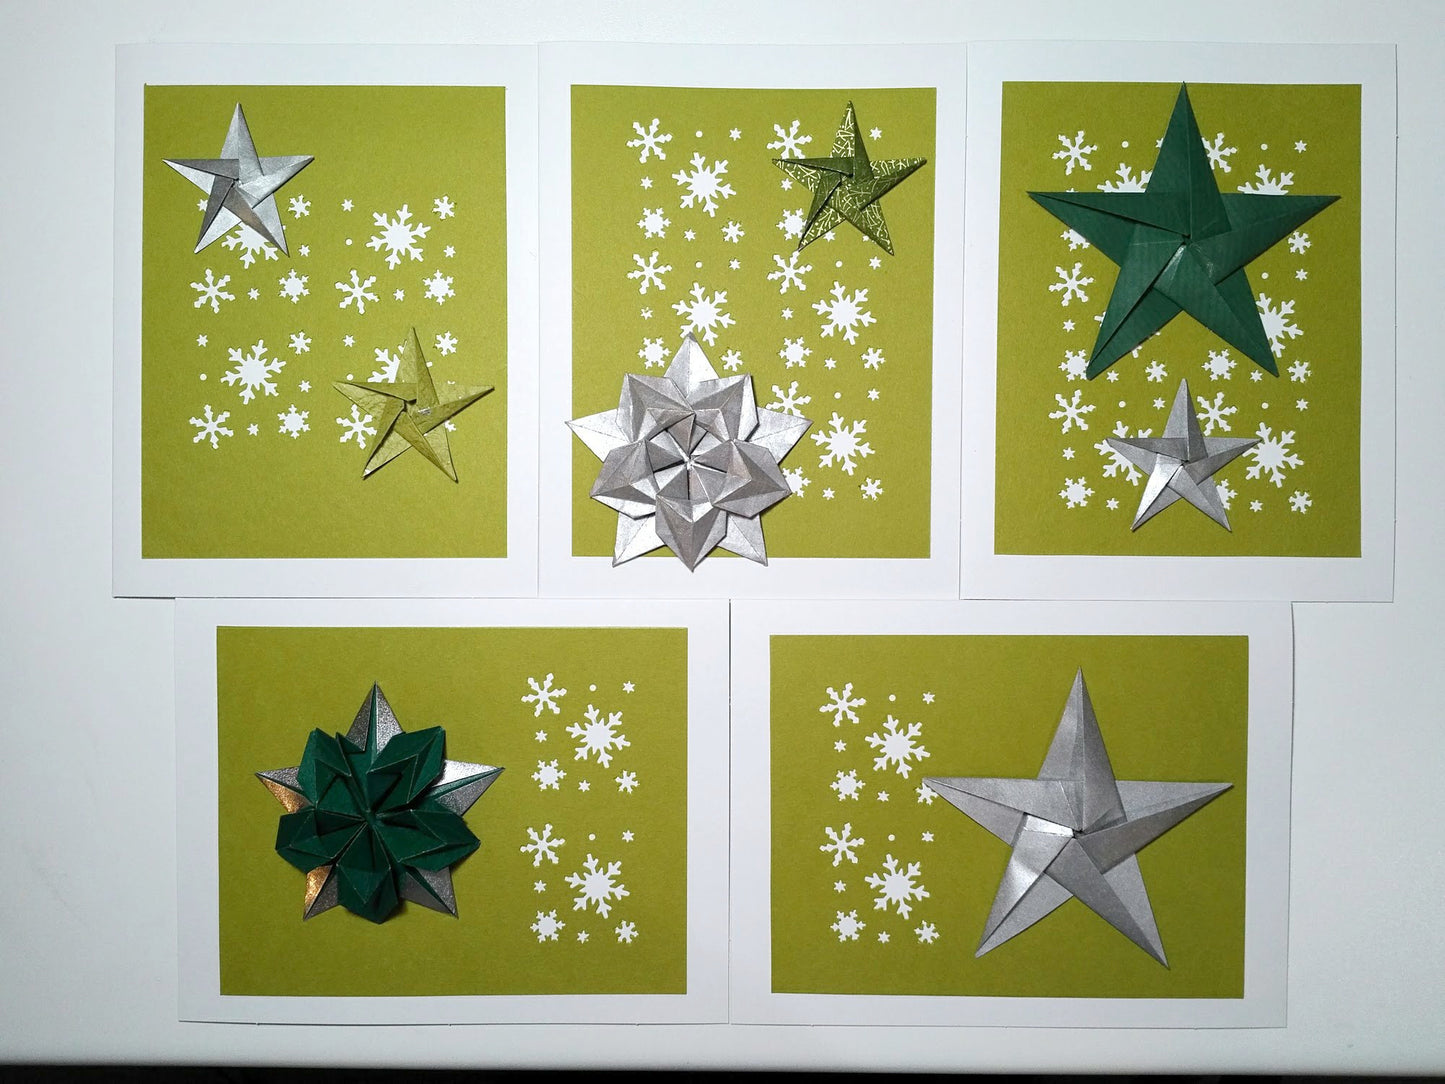 Set of five white cards. Each card has a green background with white snowflakes. On top are a variety of origami stars in both silver and green.